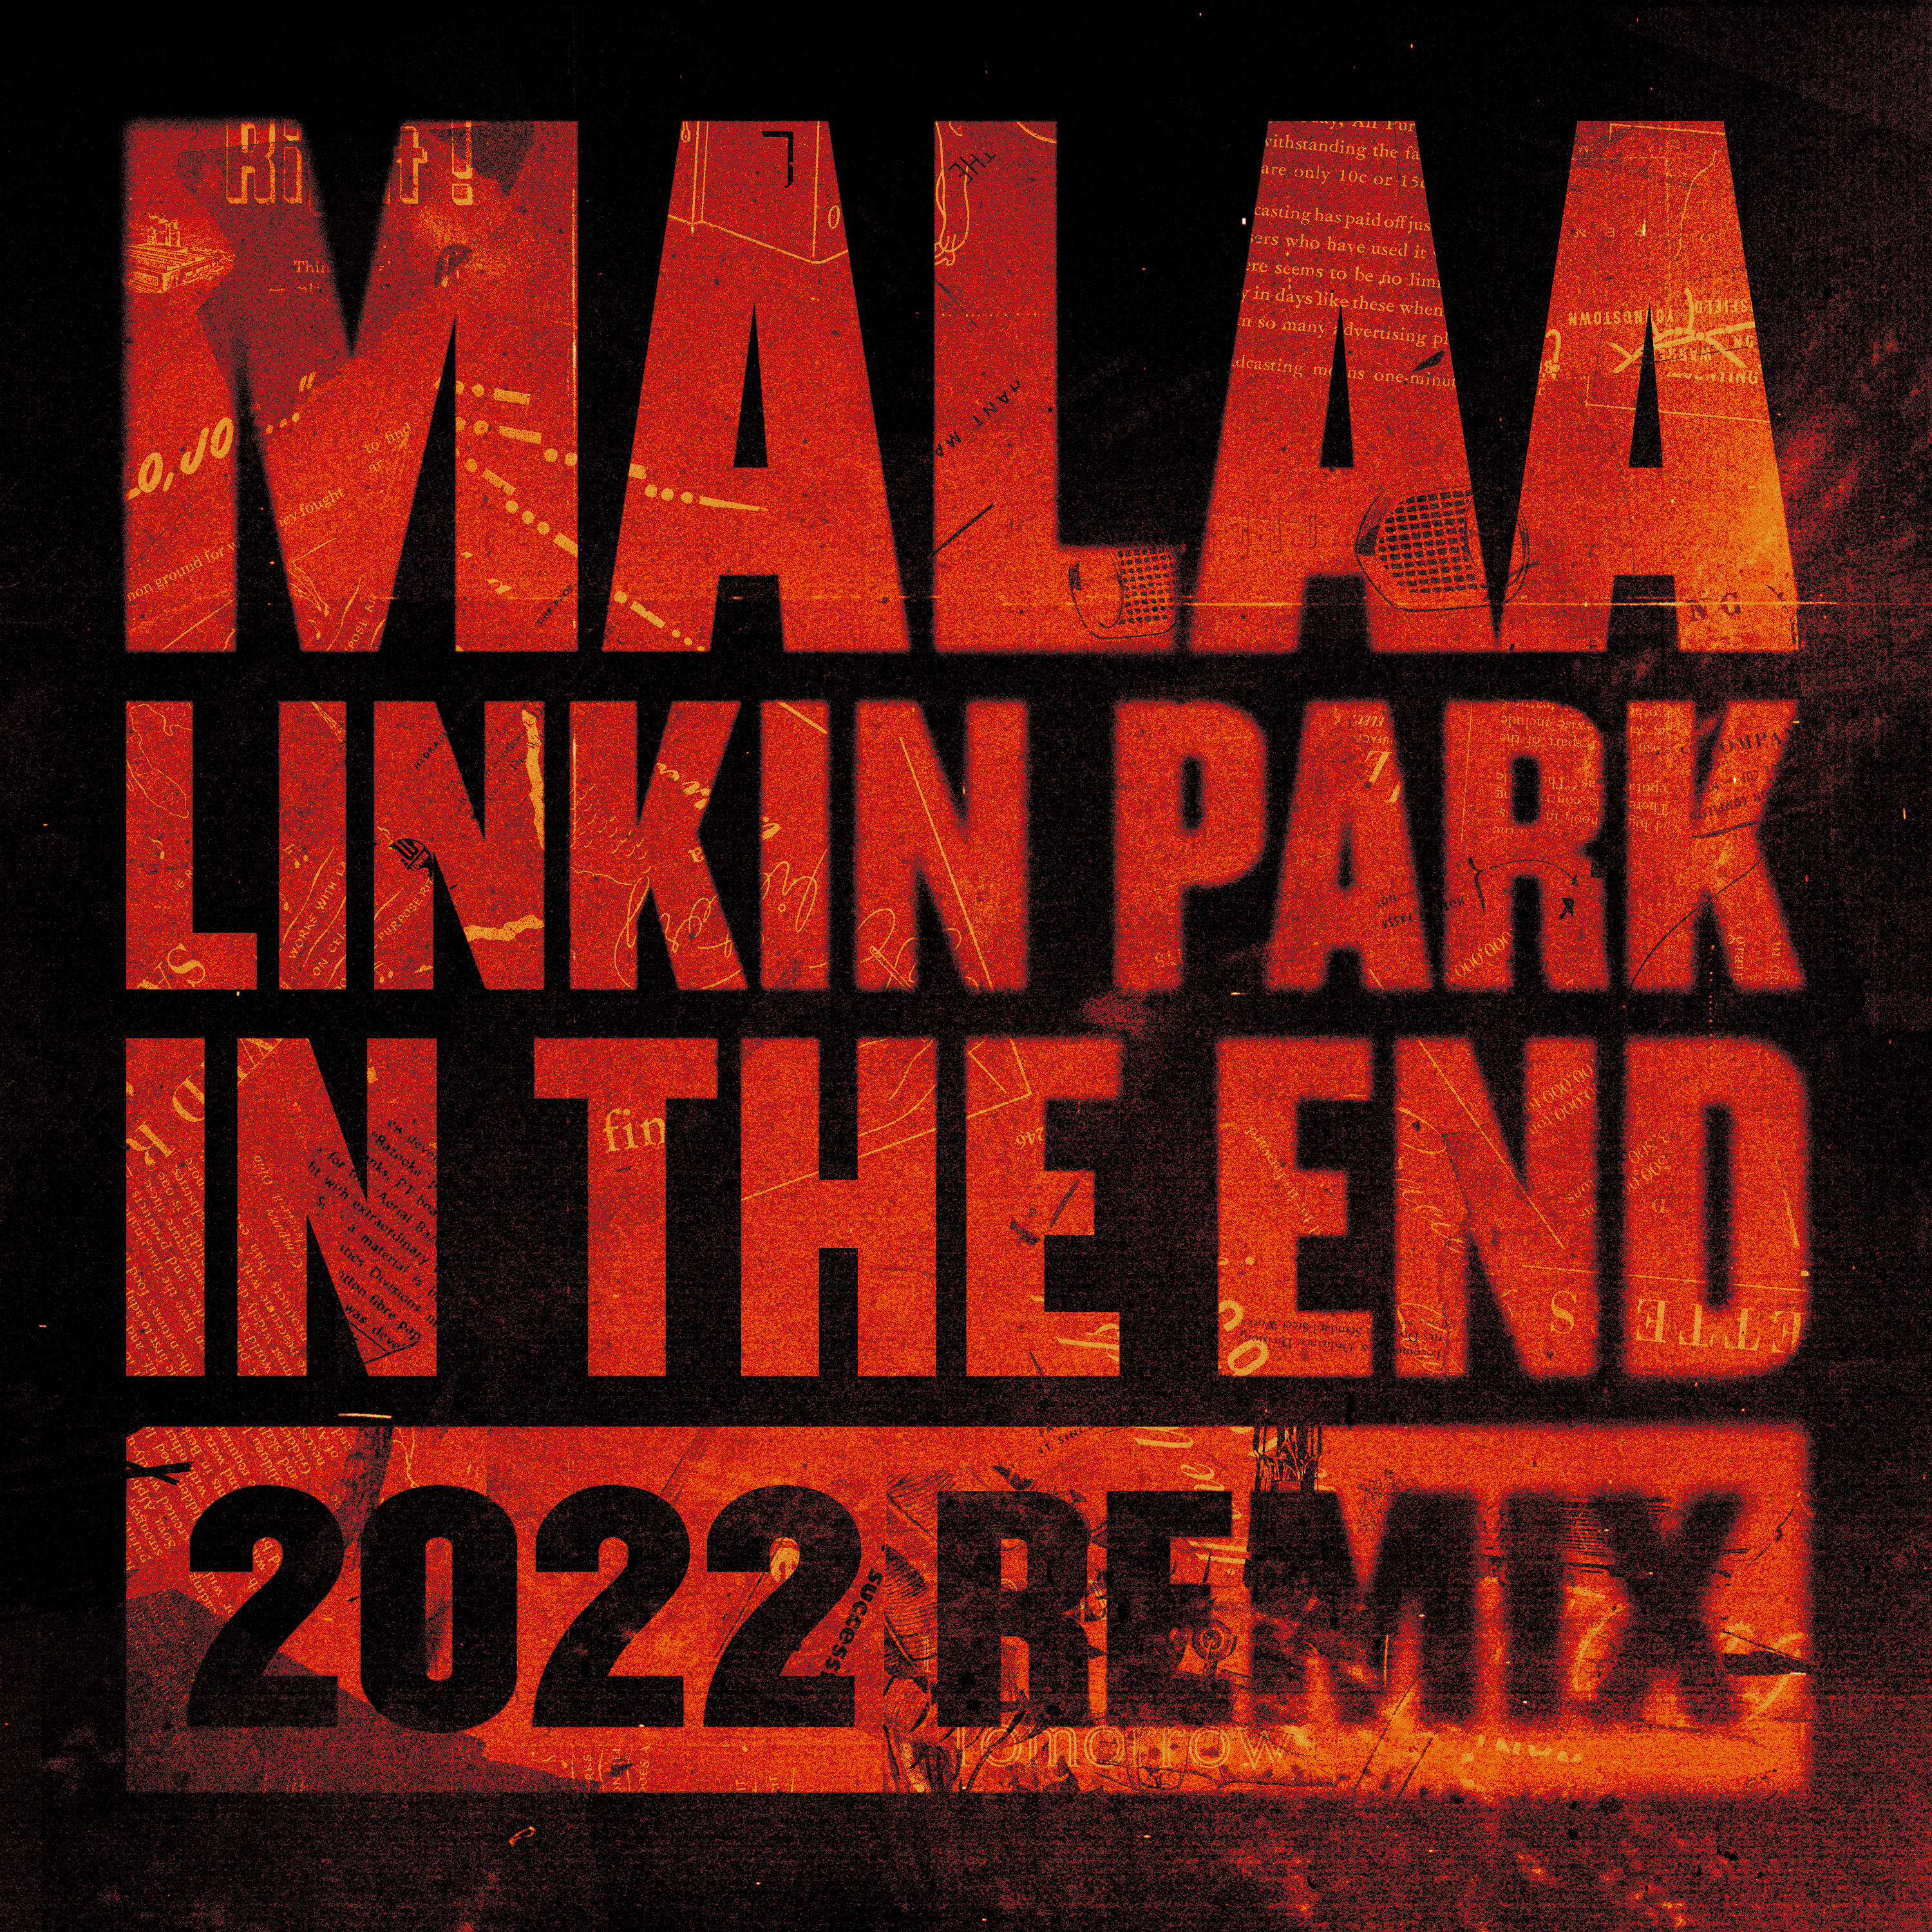 In the End (2022 Remix) (2022 Remix) [feat. Linkin Park]